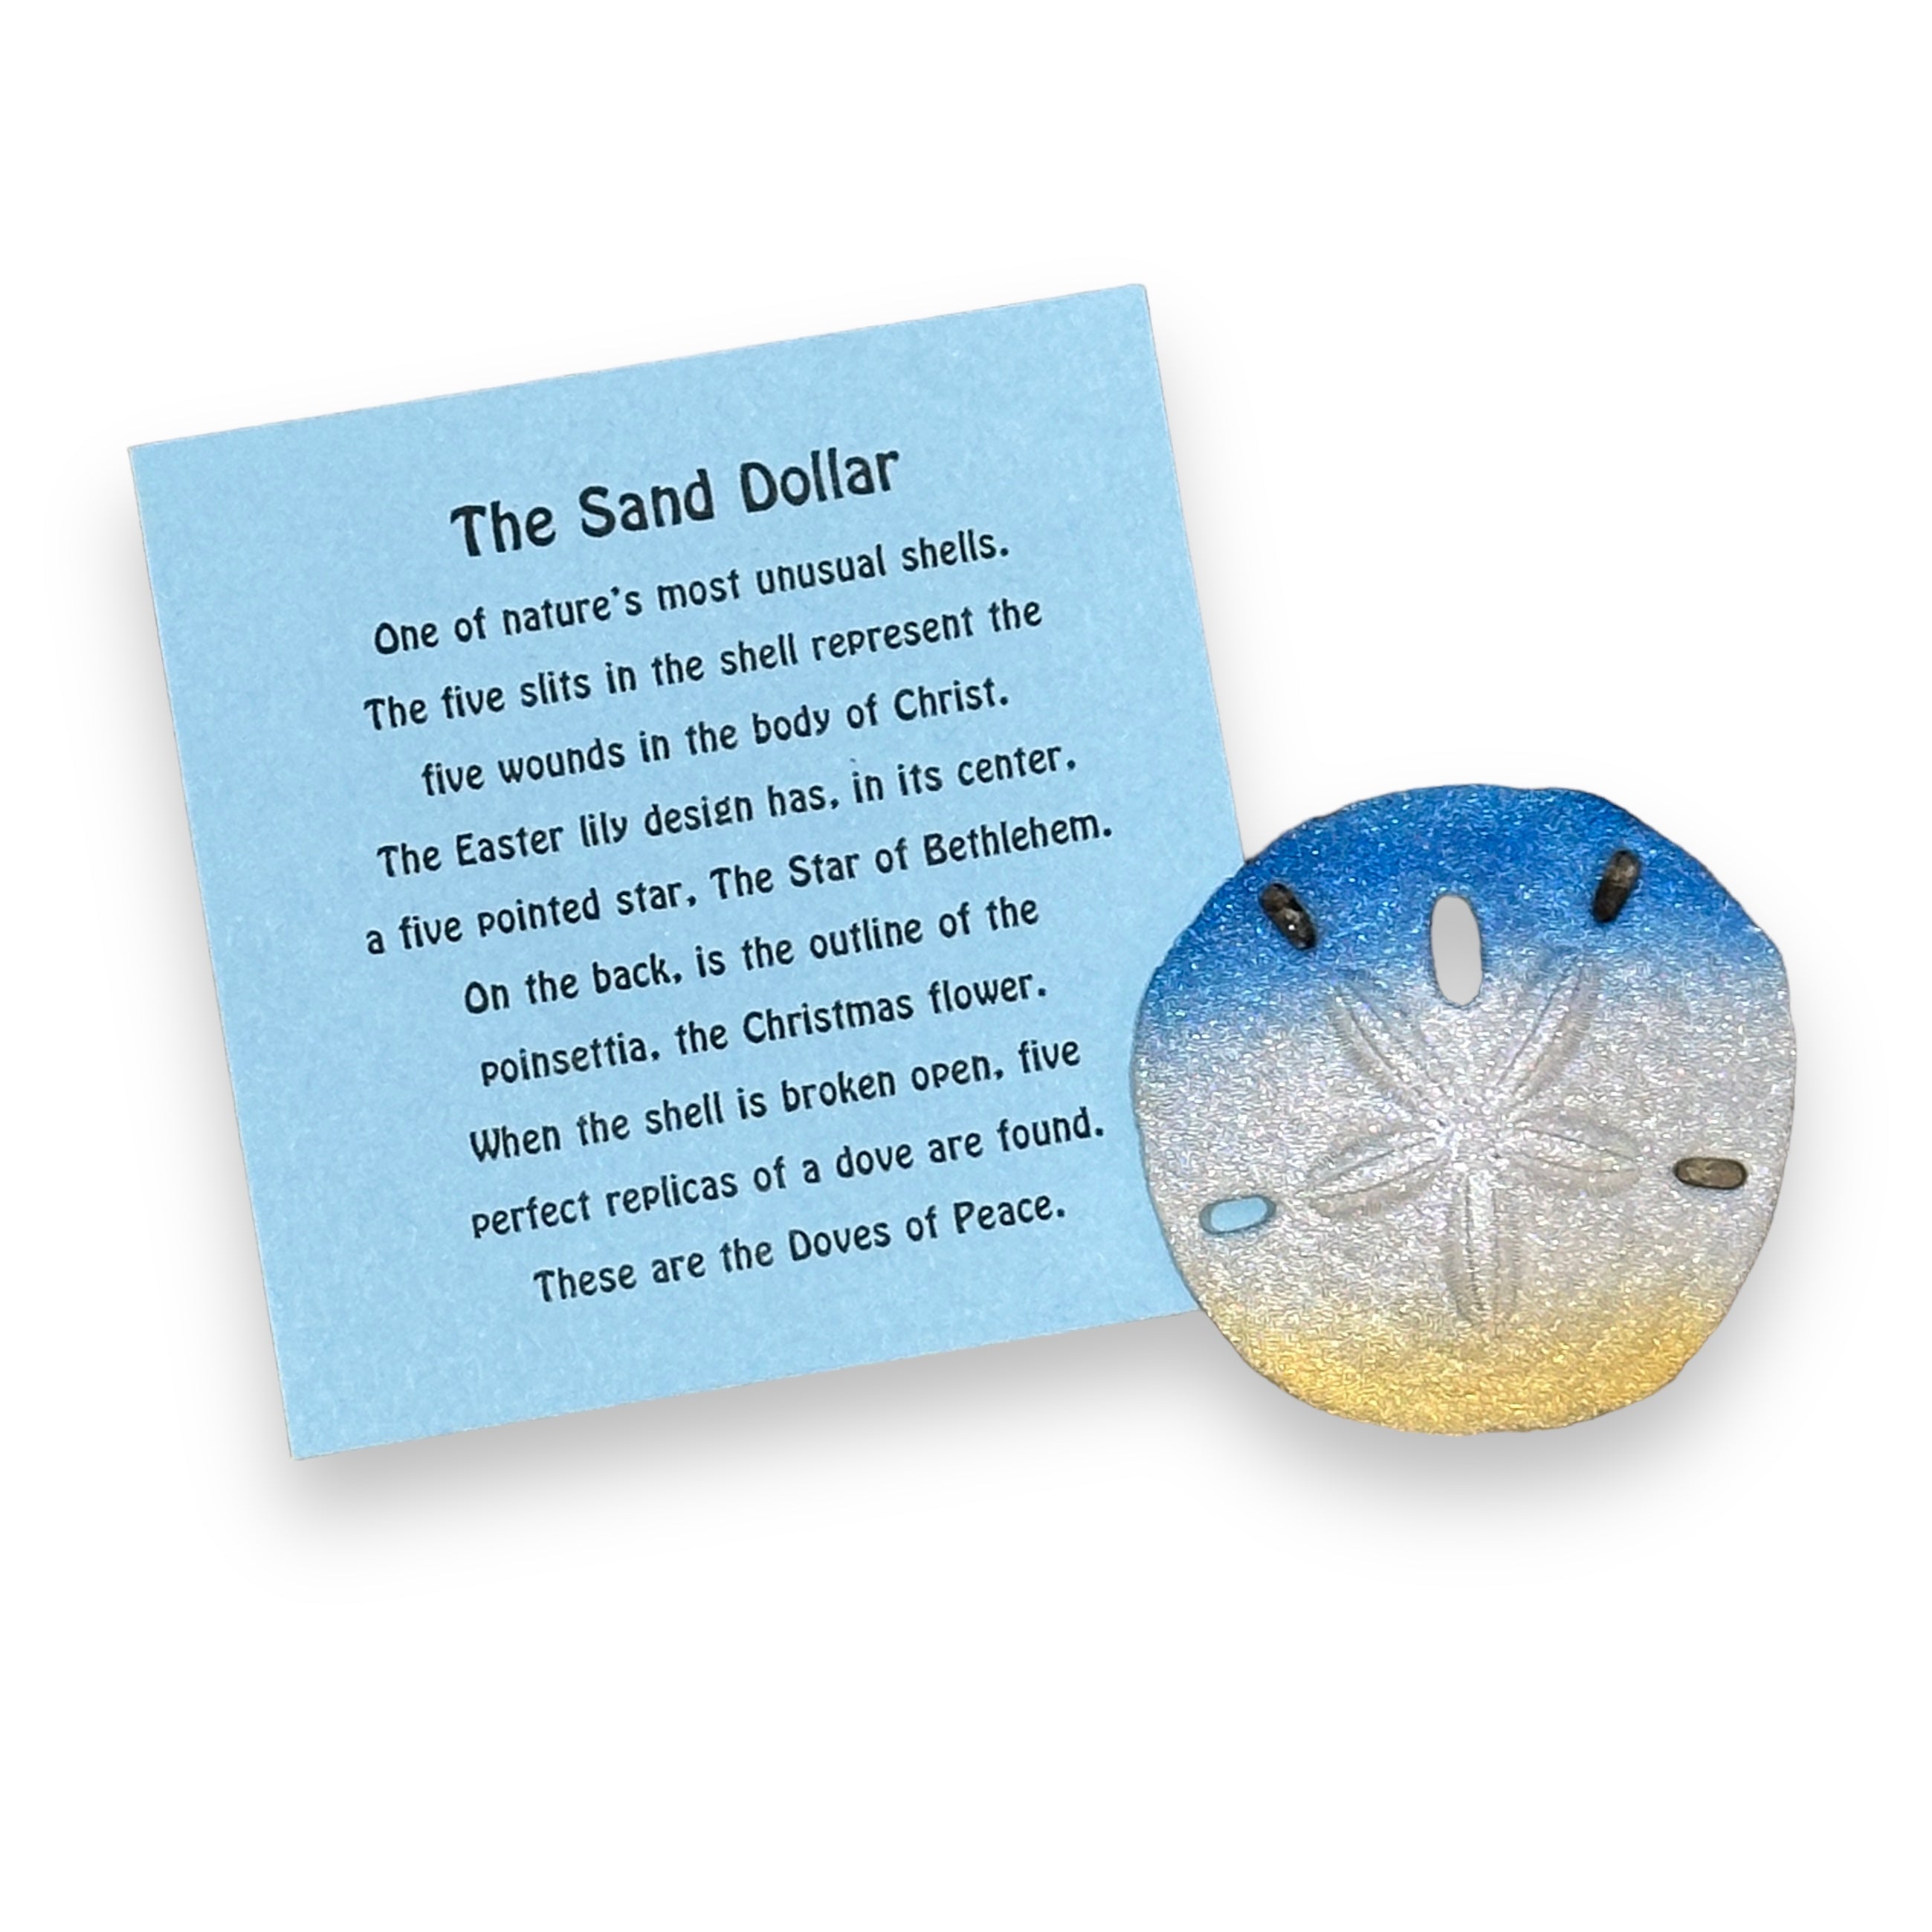 Story of the Sand Dollar